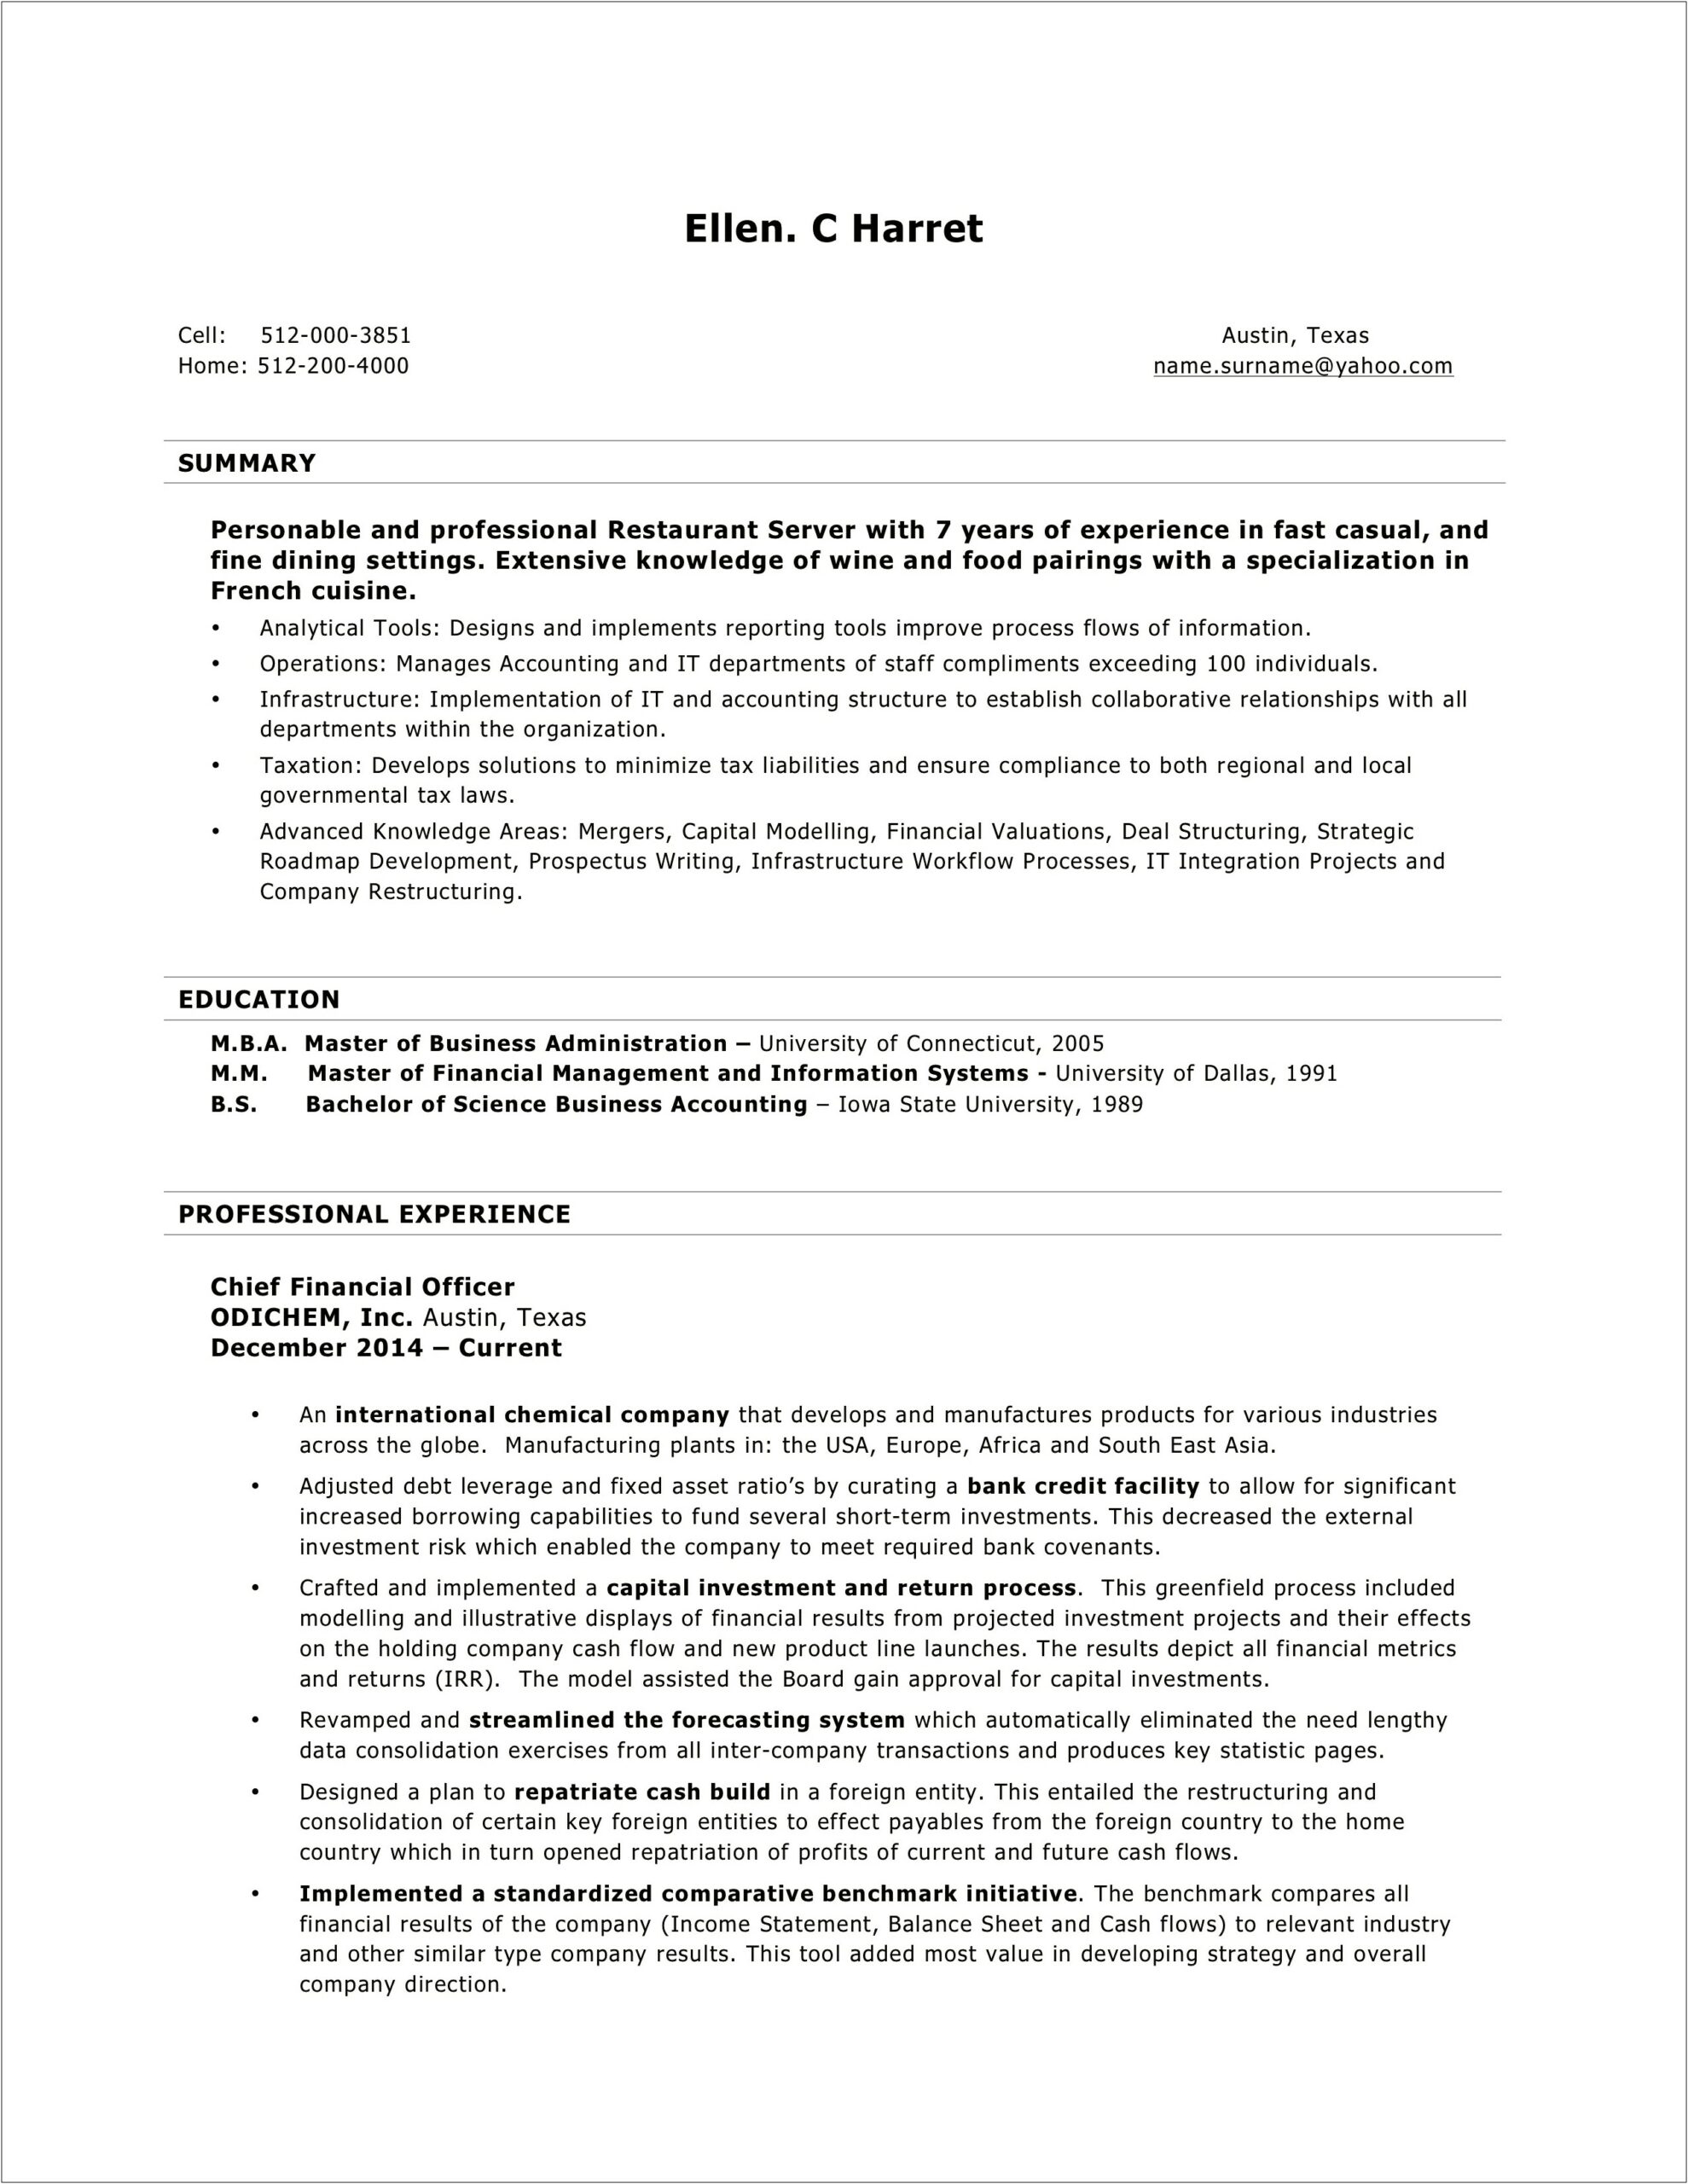 Functional Resume Example Information Technology